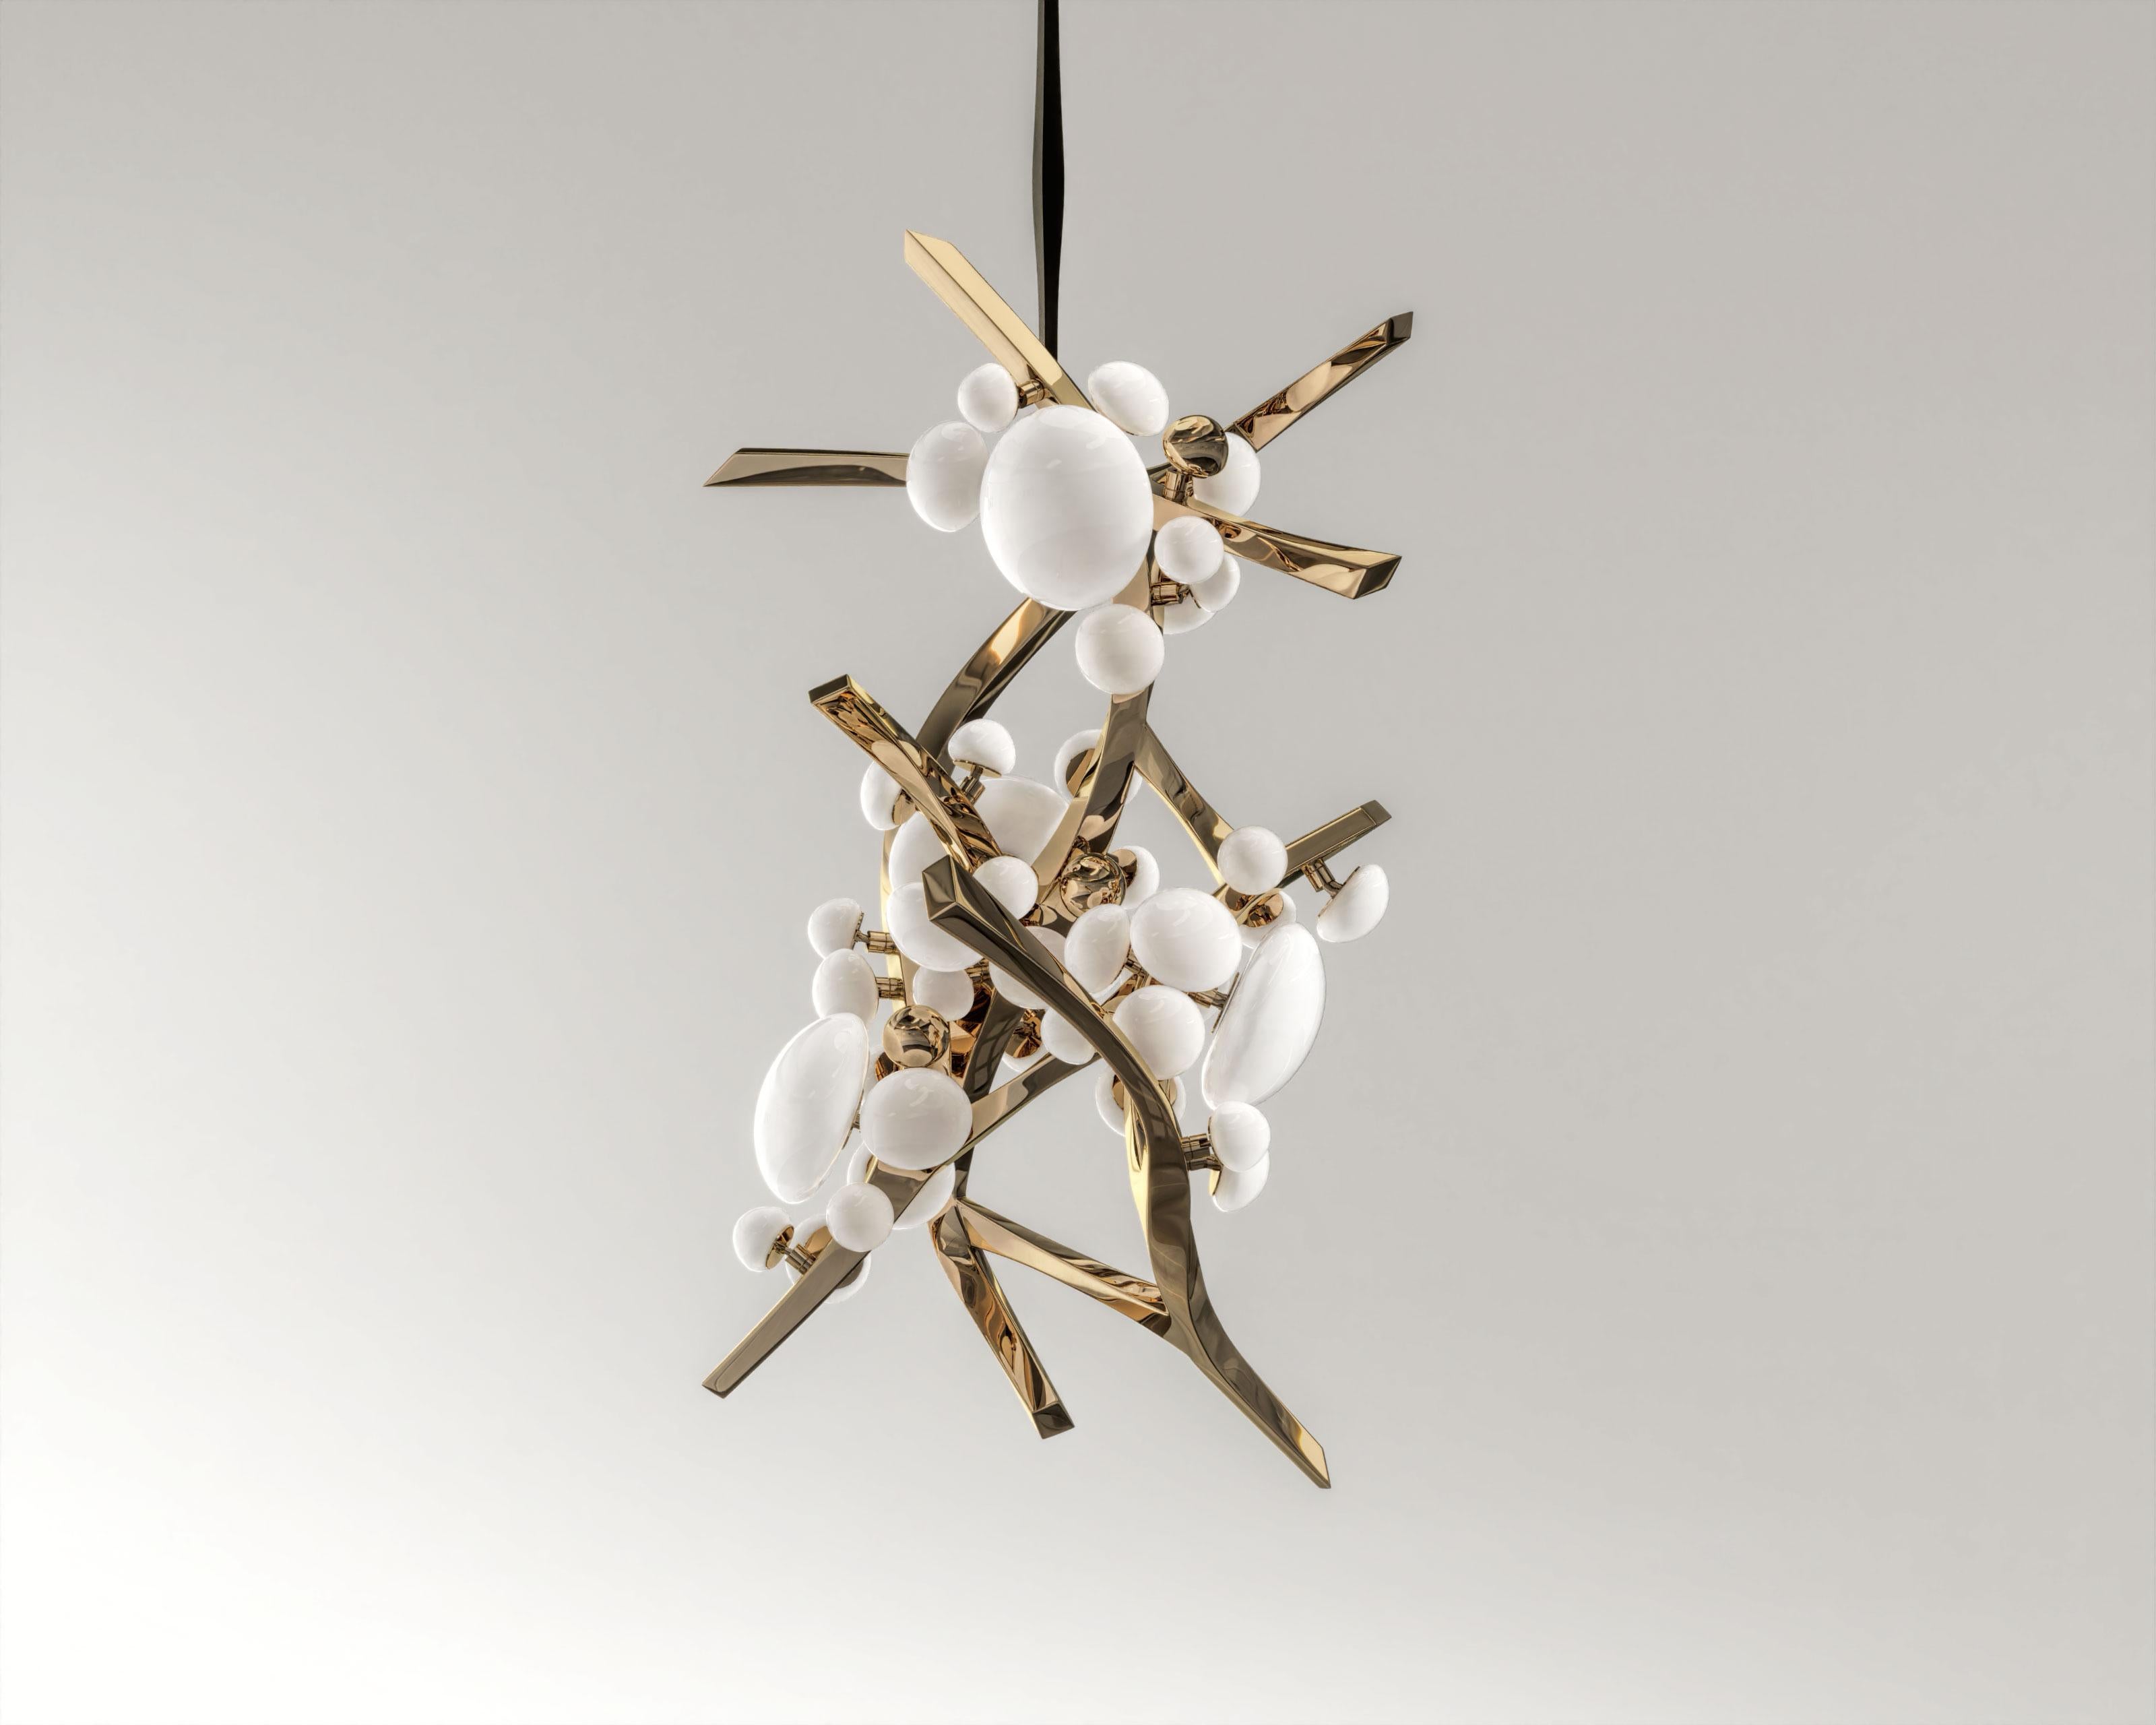 Turkish Intıma Vertical Chandelier in Polished Bronze and Milky Murano Globes by Palena For Sale